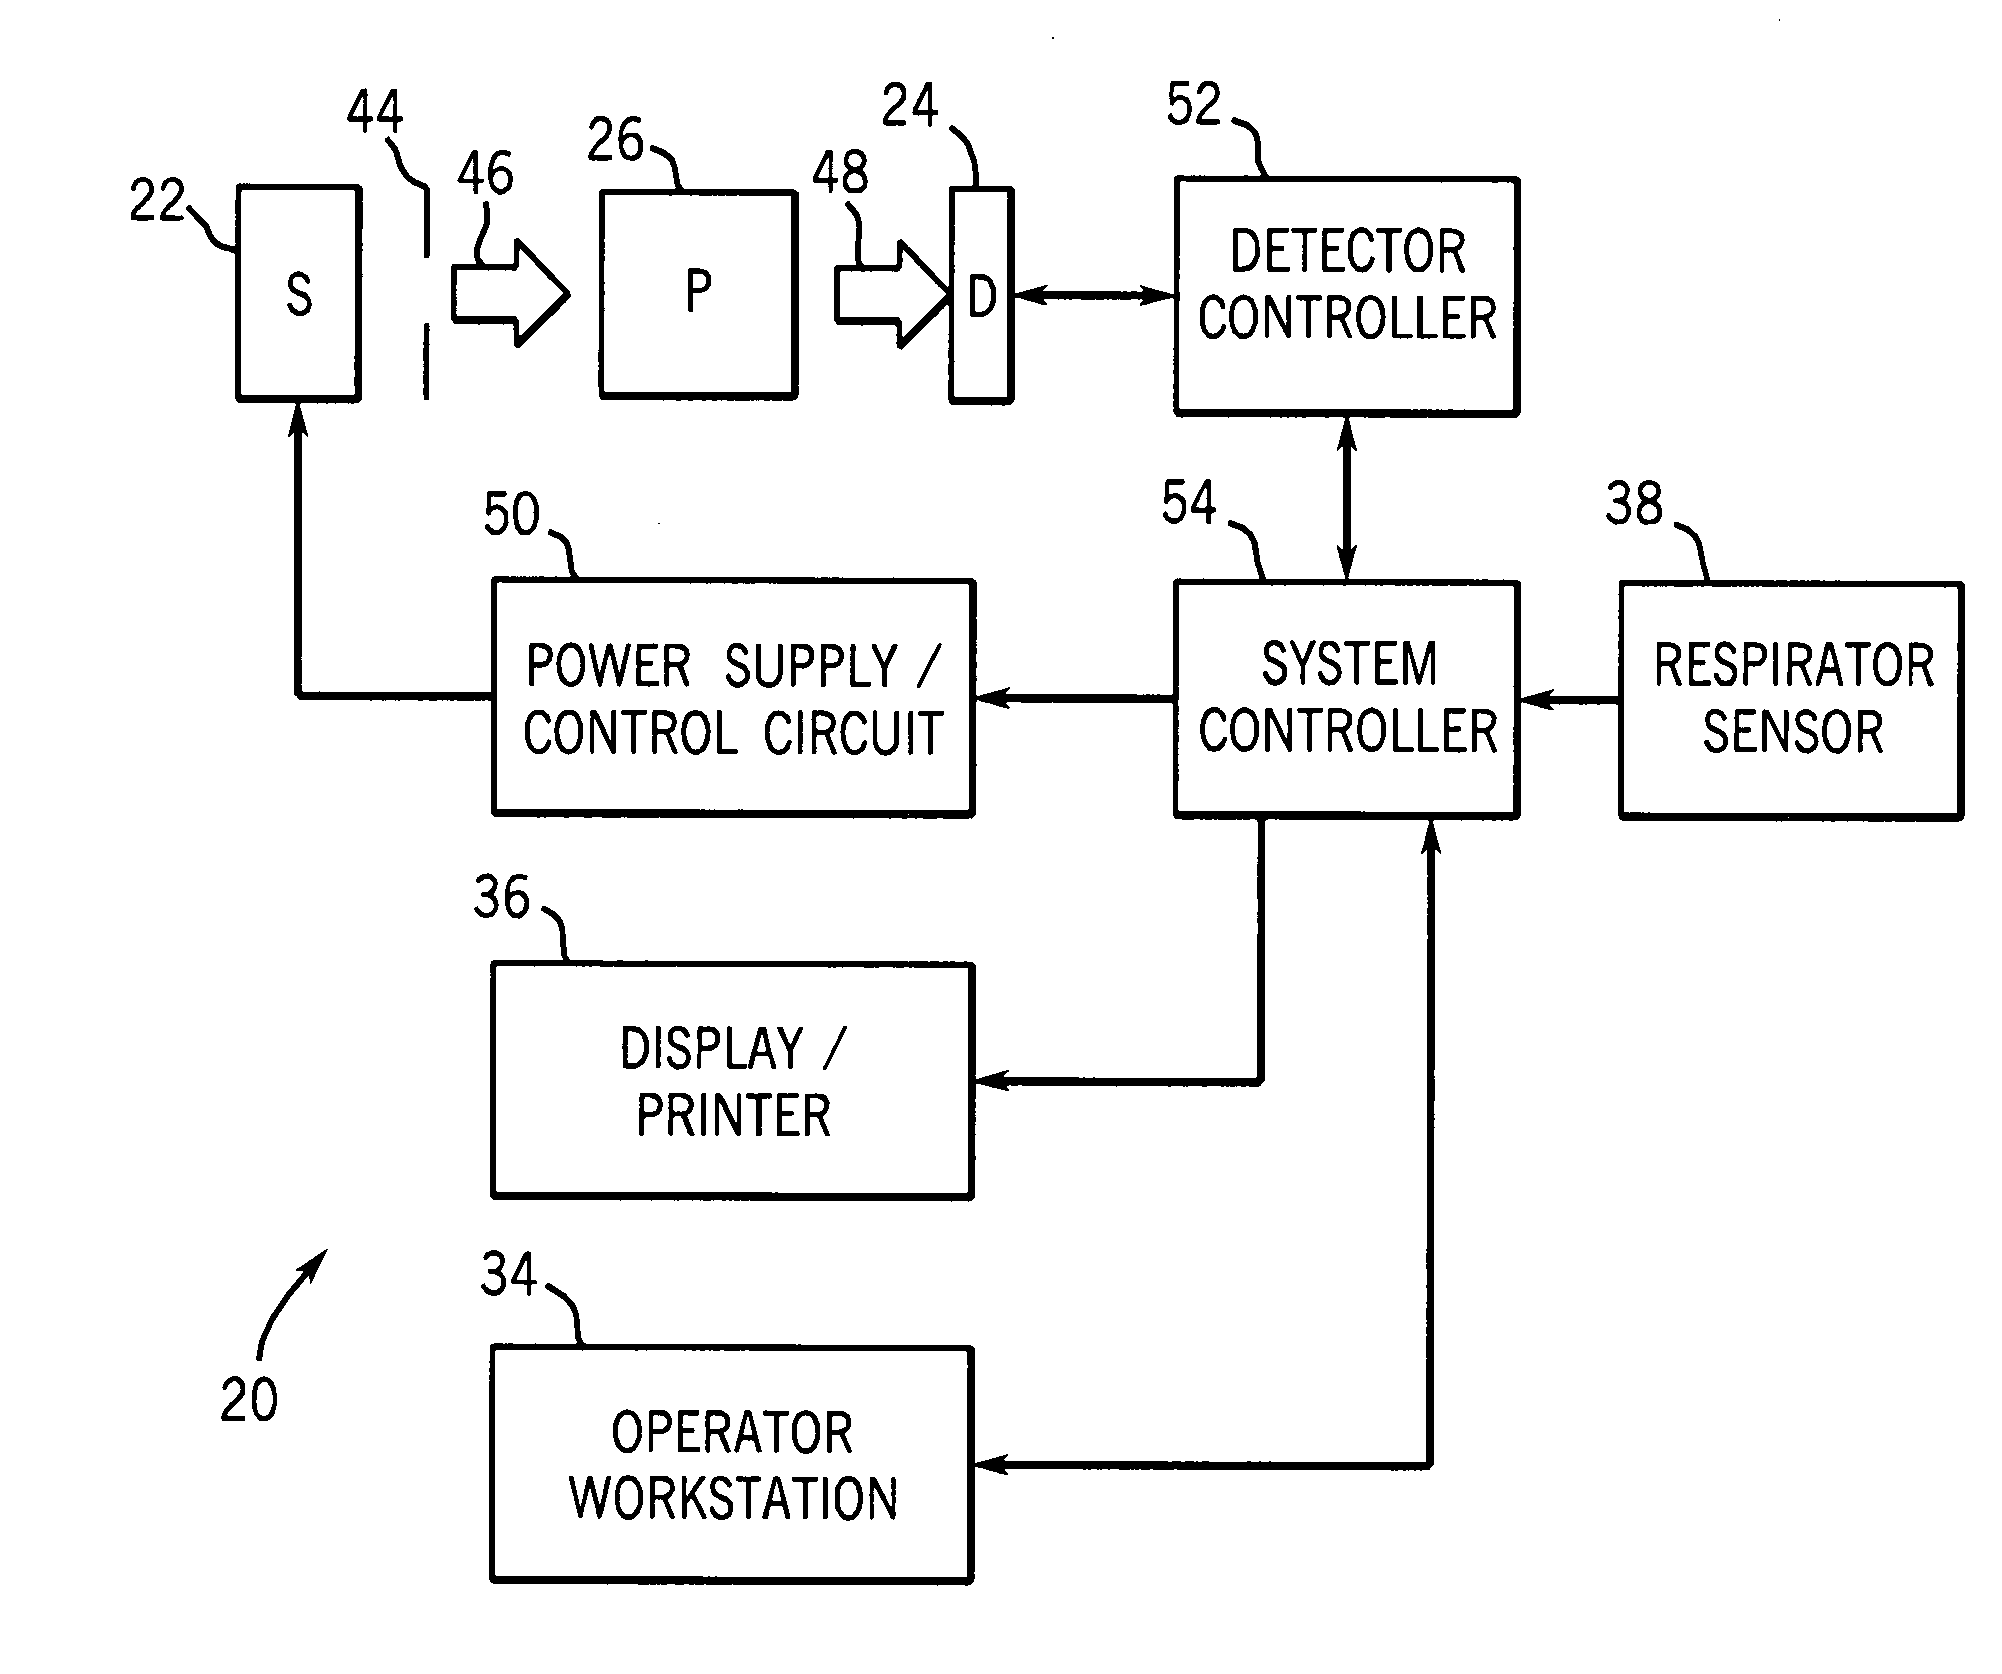 Image acquisition and processing chain for dual-energy radiography using a portable flat panel detector